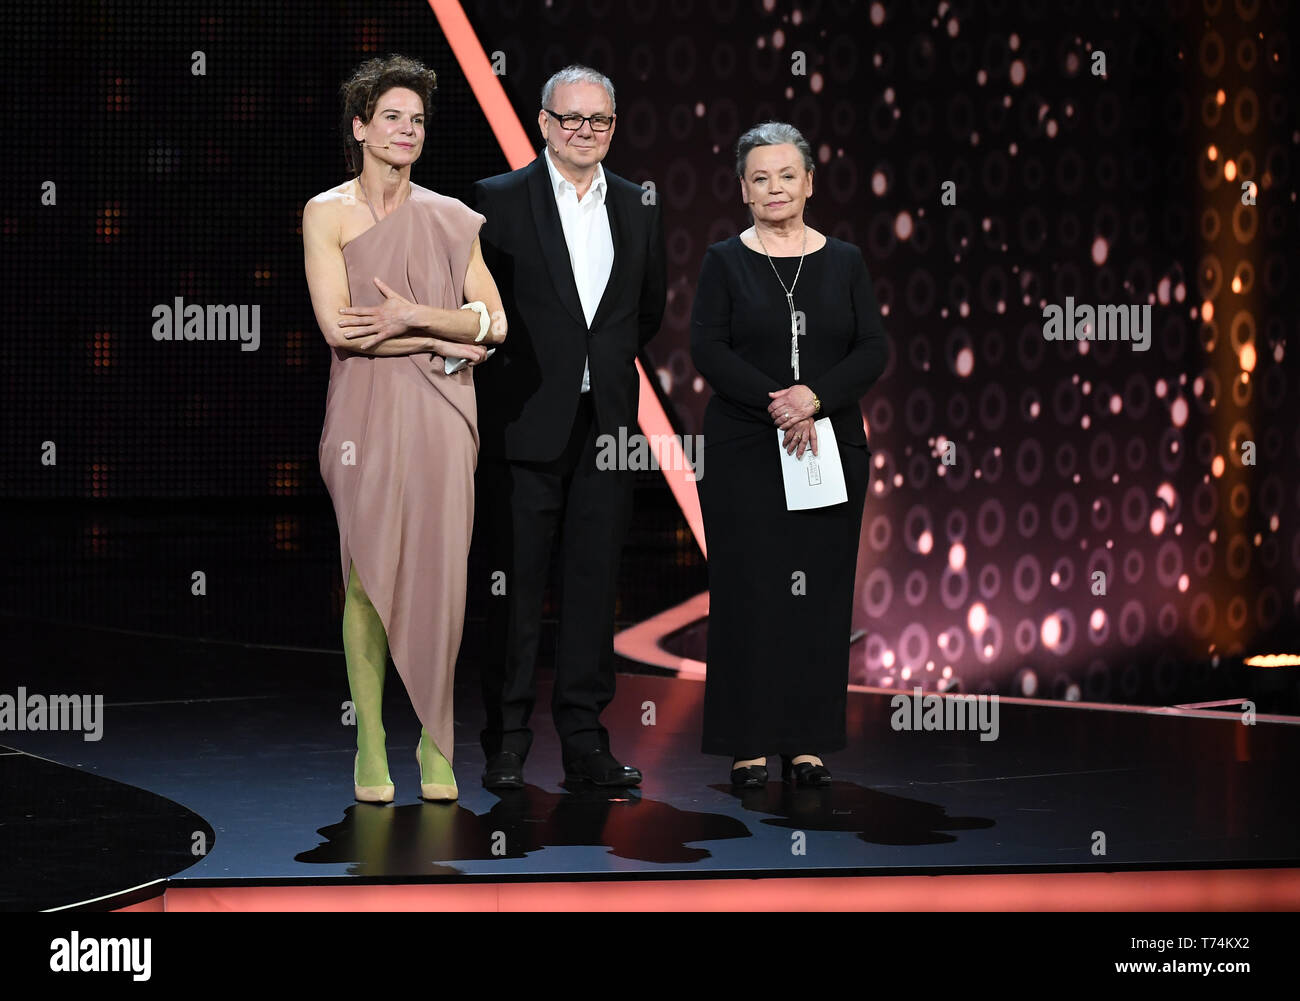 Berlin, Germany. 03rd May, 2019. The actors Ursula Werner (r), Bibiana Beglau and Joachim Krol, give the laudatio in the category 'Best Director' at the 69th German Film Award 'Lola'. Credit: Britta Pedersen/dpa-Zentralbild/dpa/Alamy Live News Stock Photo